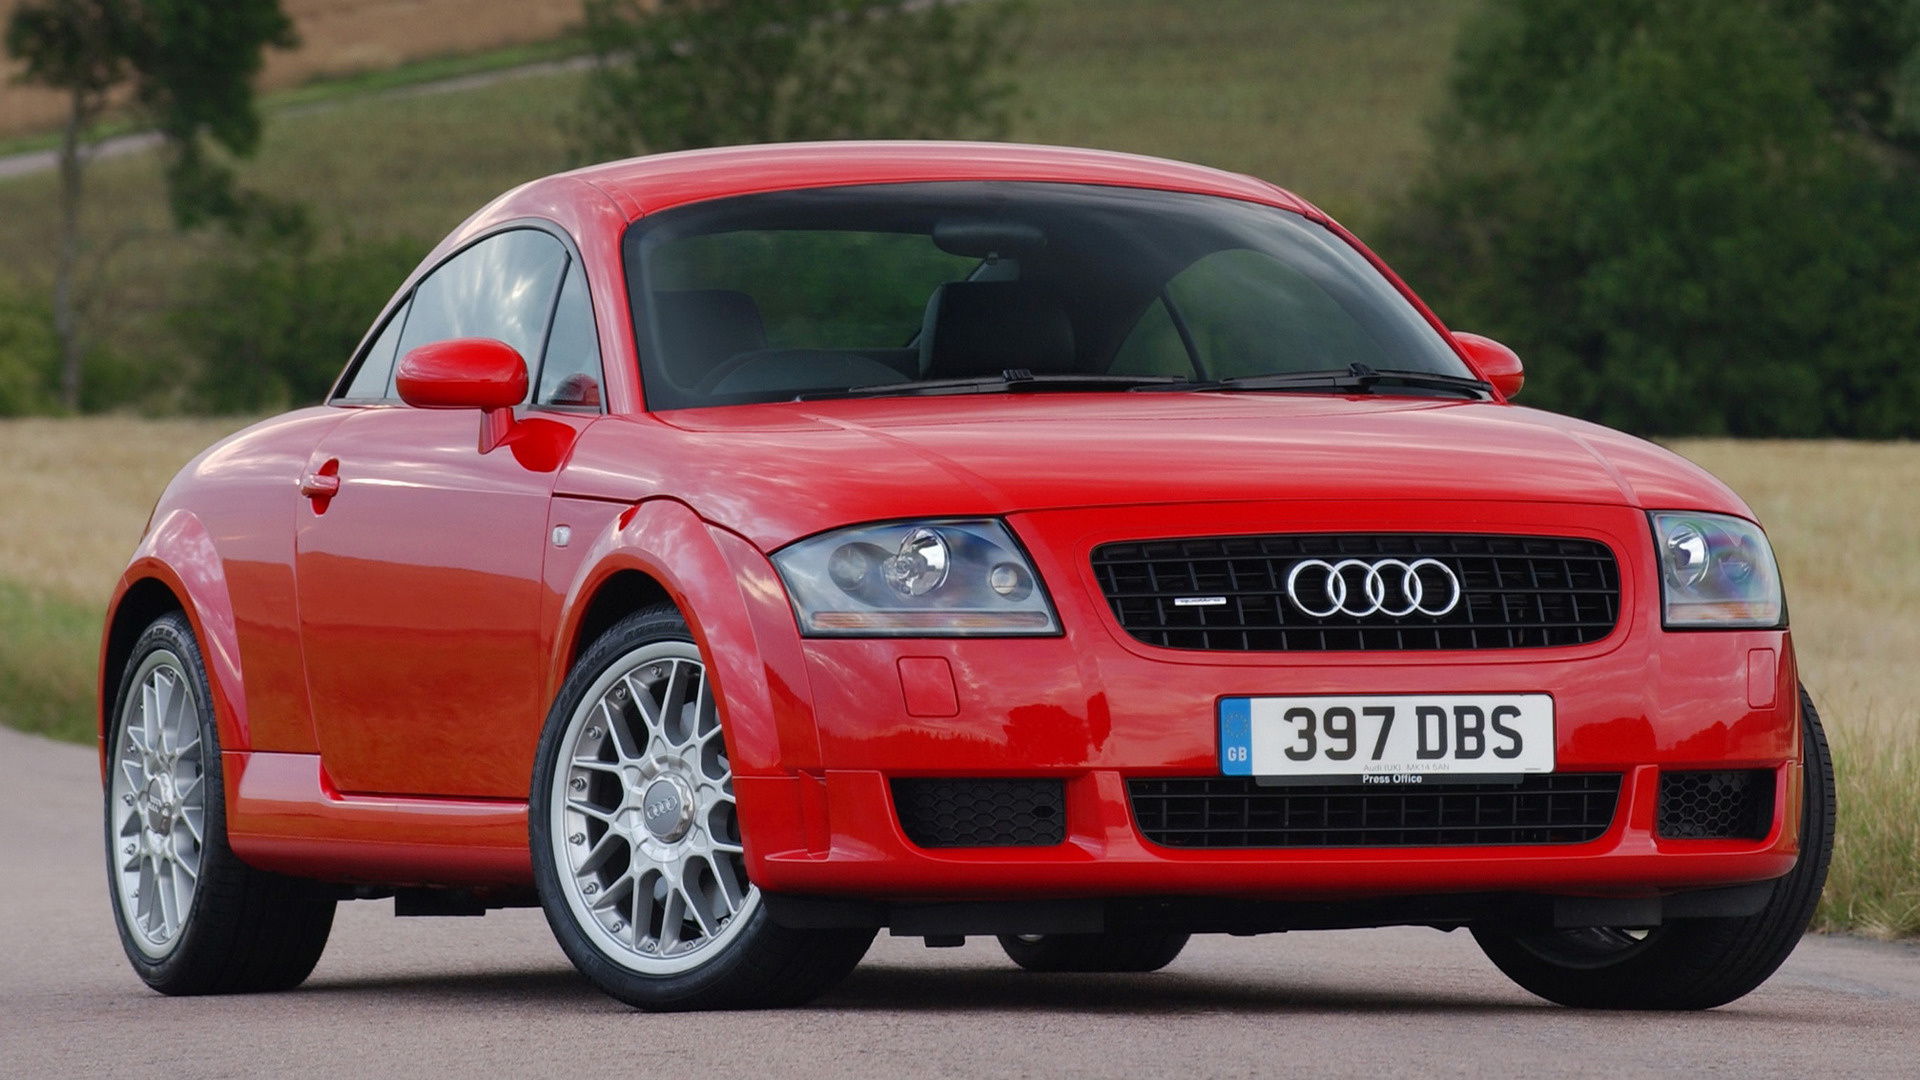 2003 Audi TT Coupe (UK) - Wallpapers and HD Images | Car Pixel